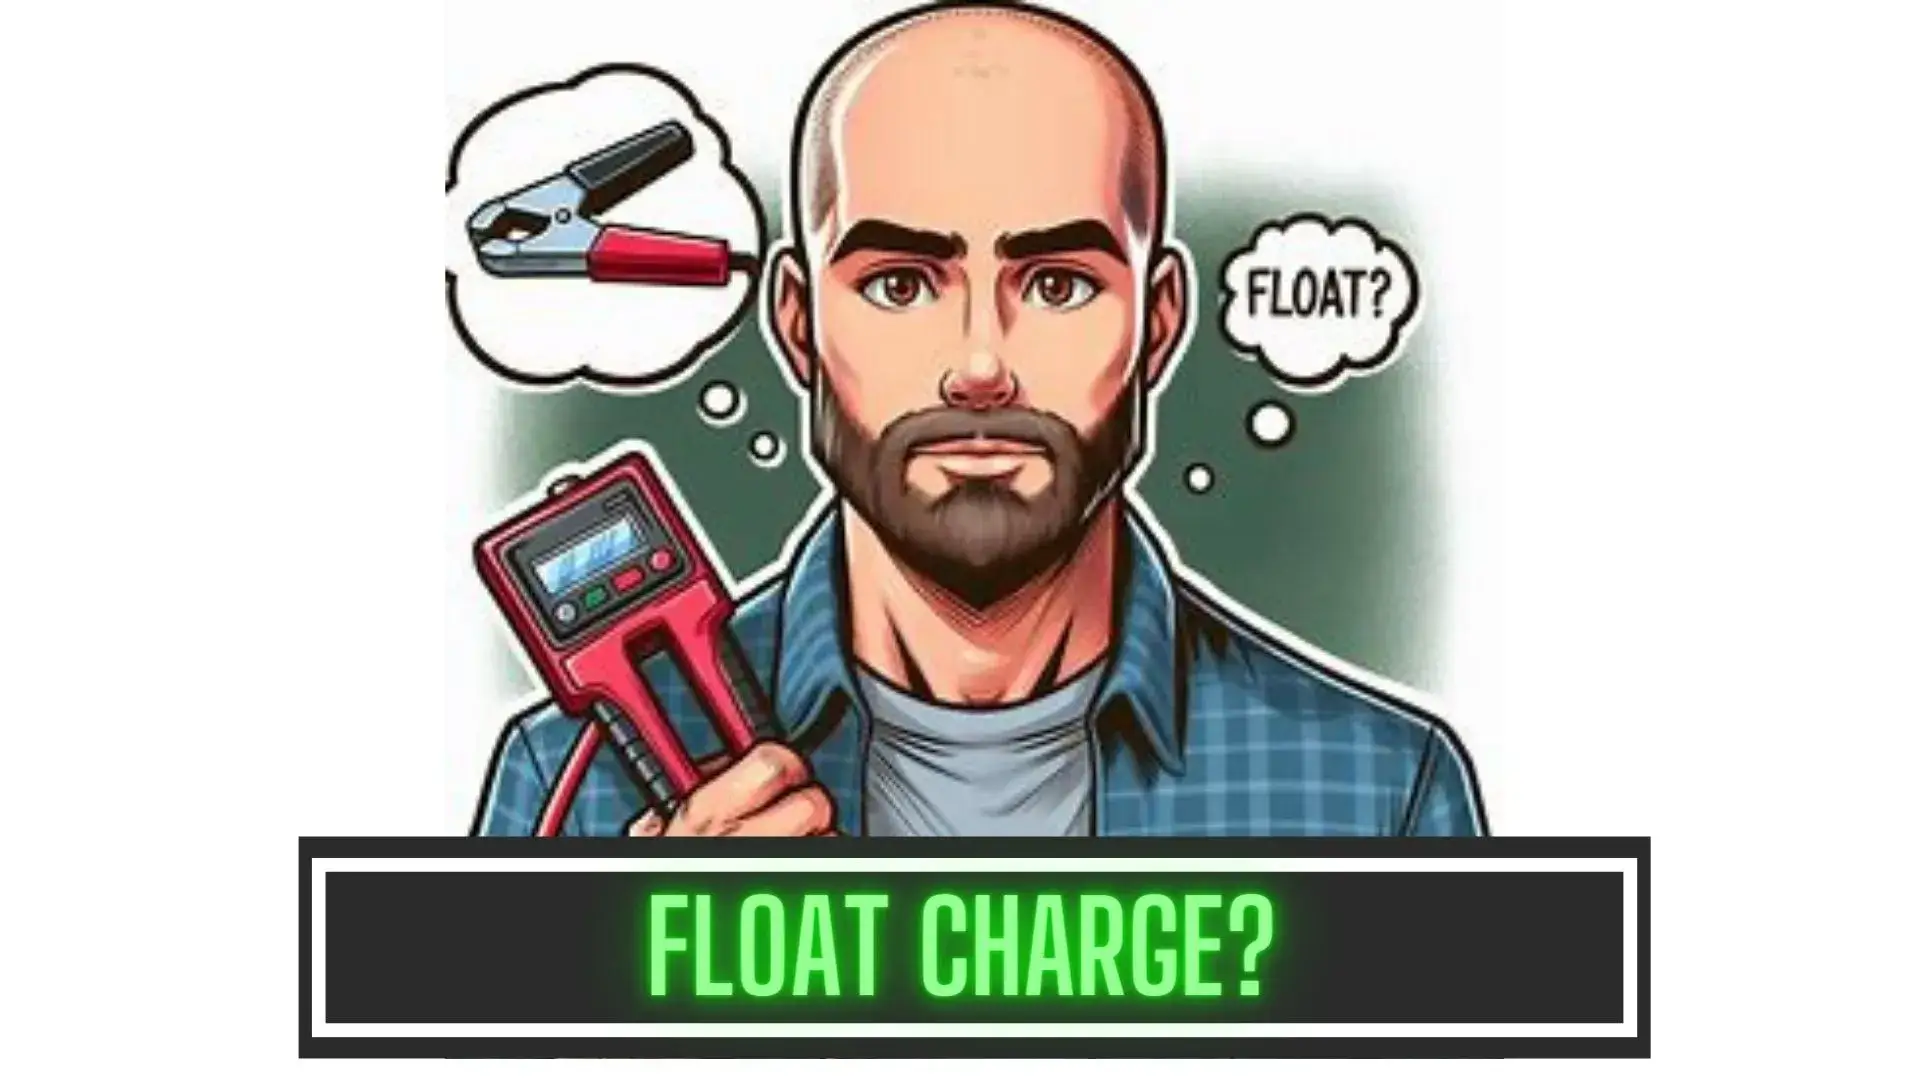 What Does Float Charge Mean on a Battery Charger